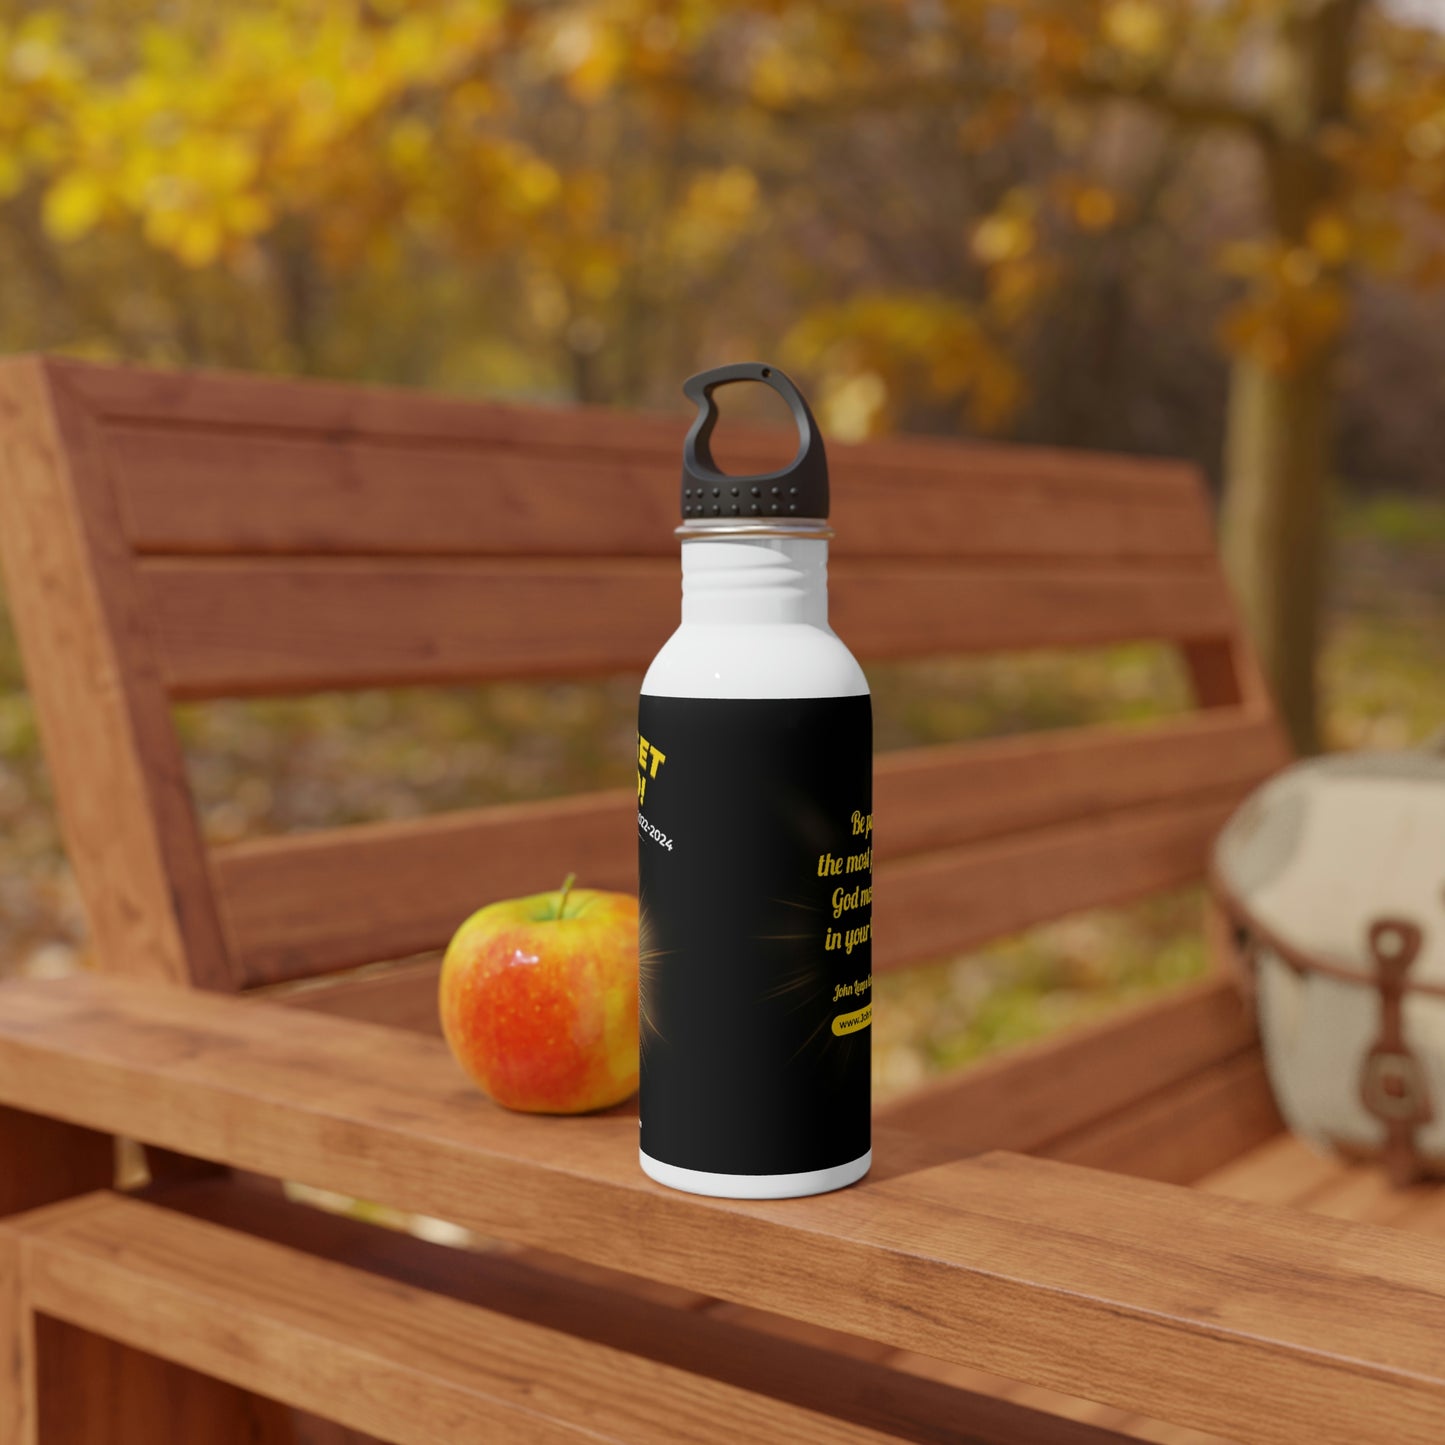 Come get healed! Stainless Steel Water Bottle